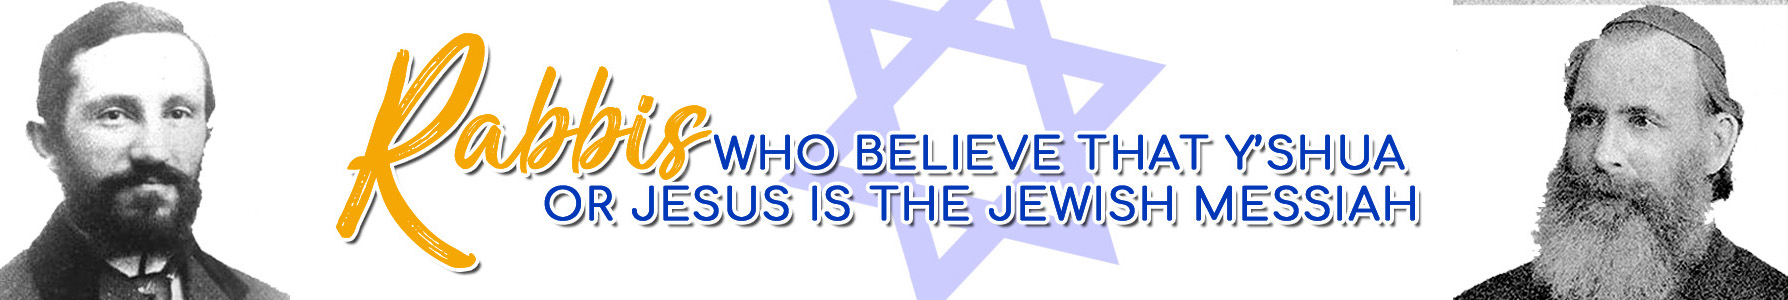 Rabbis Who Believe That Y'shua or Jesus is the Jewish Messiah